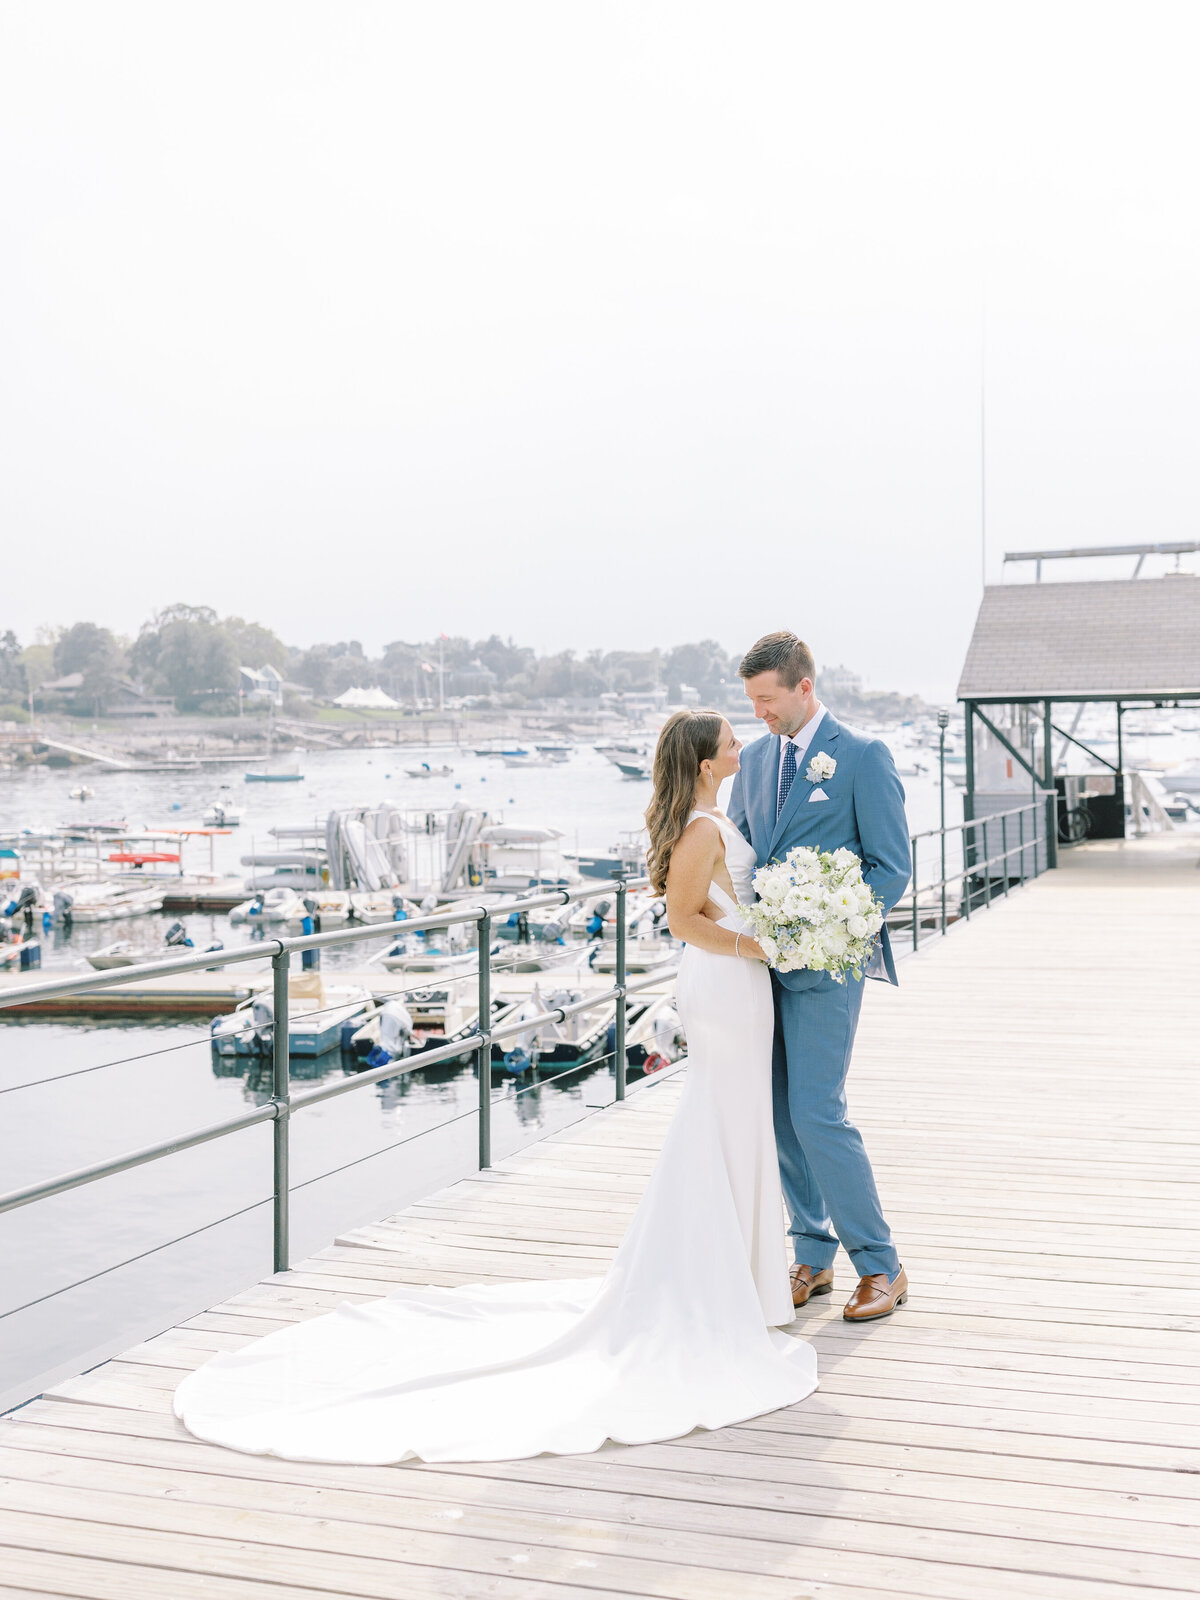 Bride and groom standing together and smiling at each other on a dock in front of boats on the water